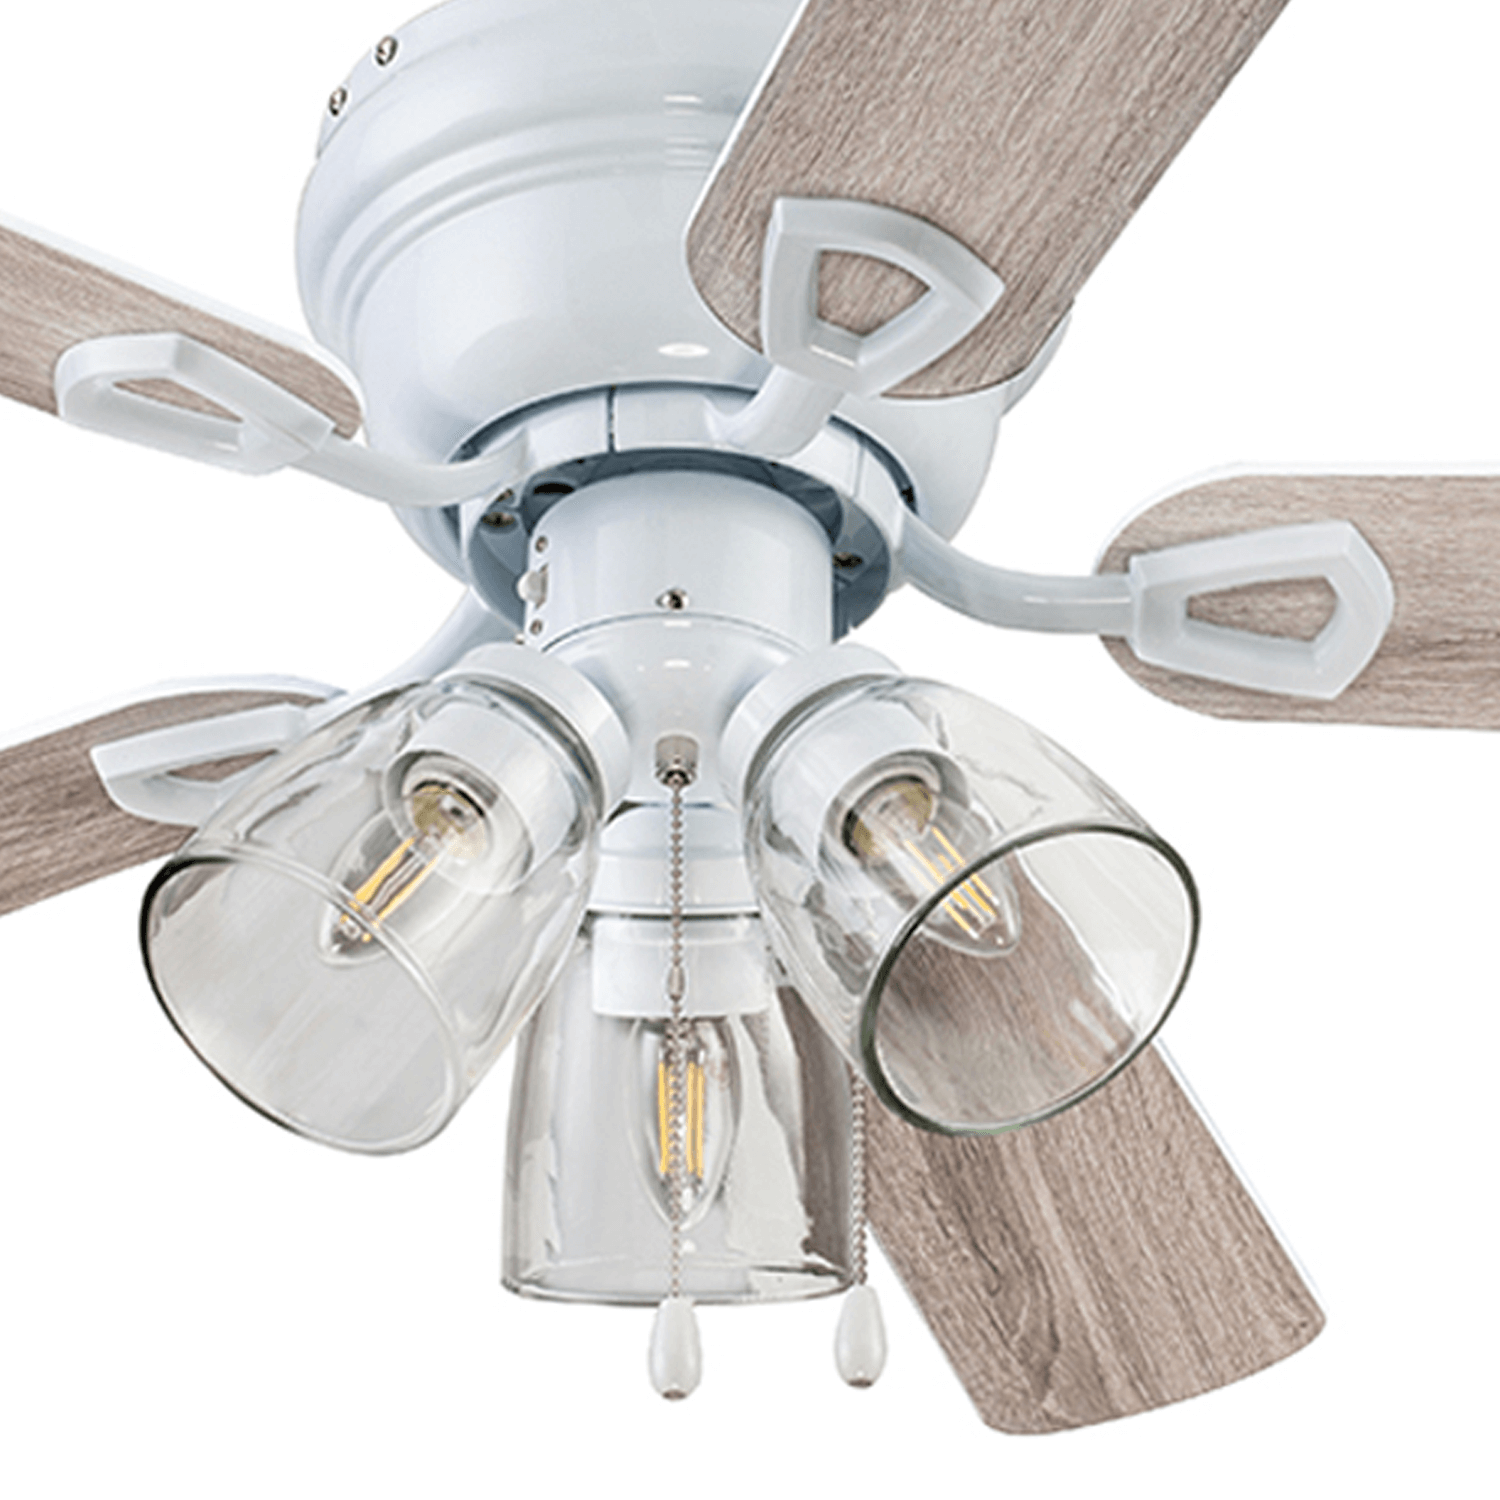 42 Inch Renton, White, Pull Chain, Ceiling Fan by Prominence Home